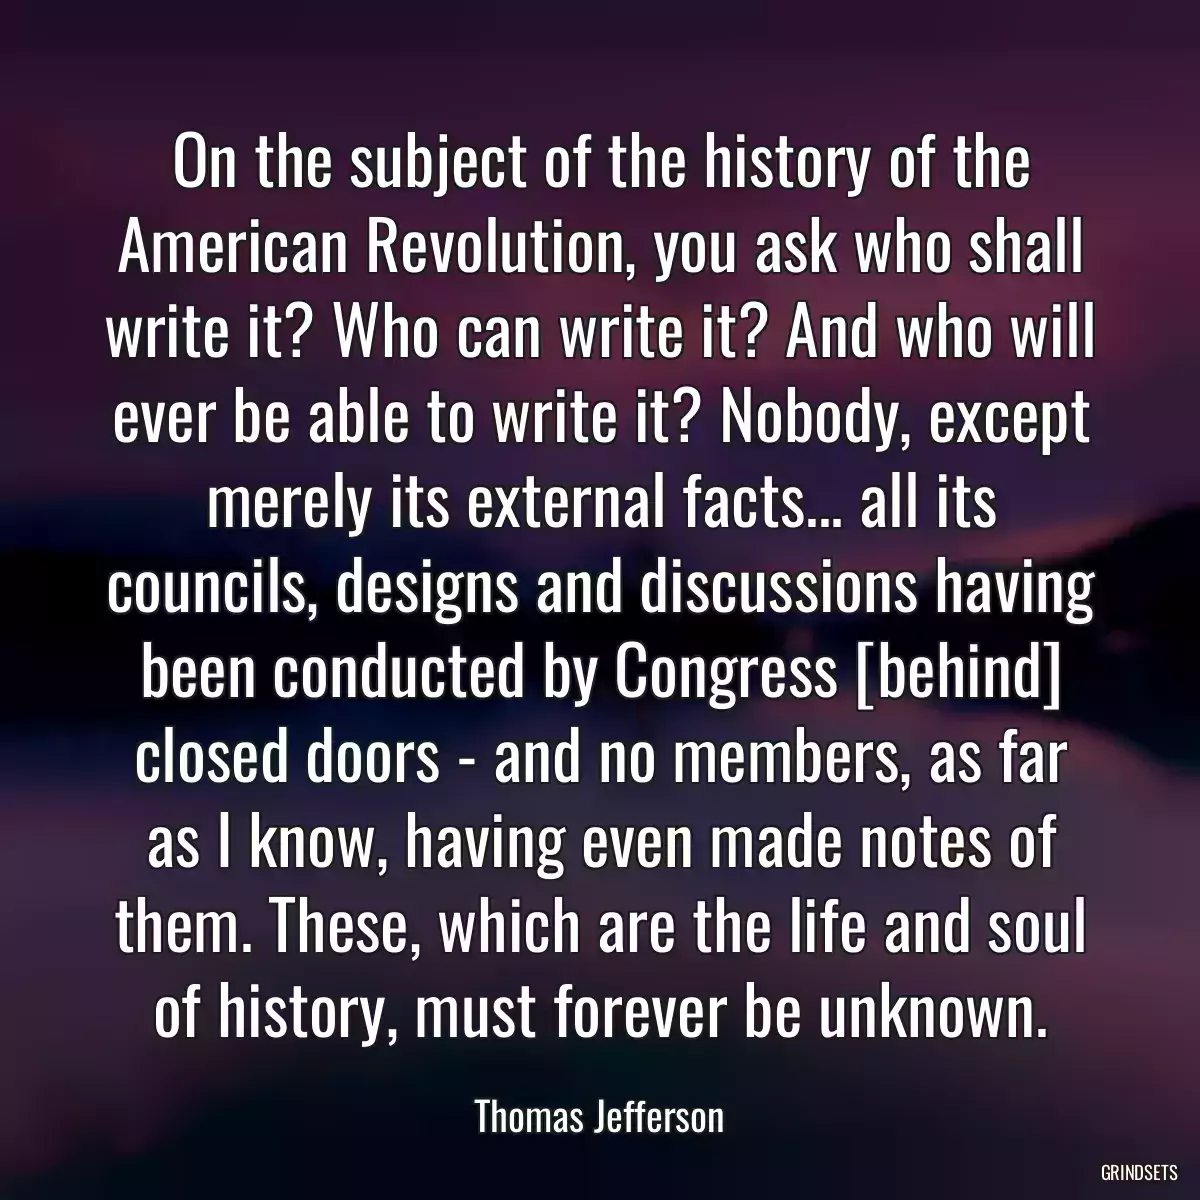 On the subject of the history of the American Revolution, you ask who shall write it? Who can write it? And who will ever be able to write it? Nobody, except merely its external facts... all its councils, designs and discussions having been conducted by Congress [behind] closed doors - and no members, as far as I know, having even made notes of them. These, which are the life and soul of history, must forever be unknown.